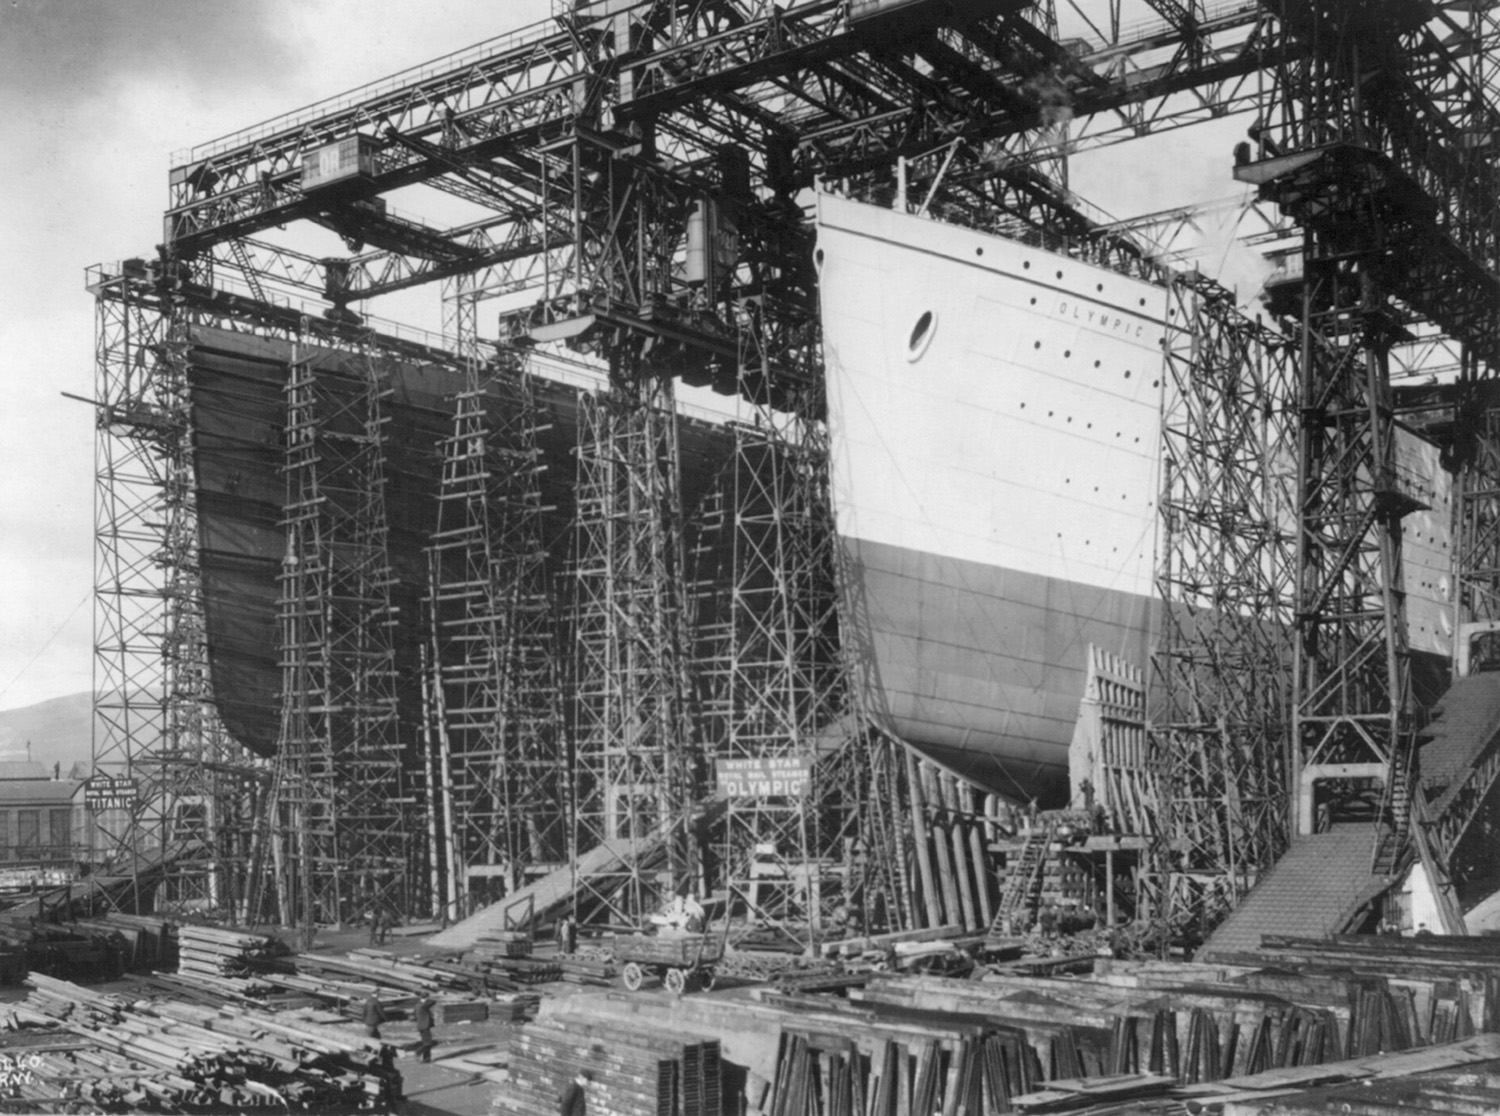 The White Star Line vessels Olympic and Titanic (left) under construction at the Harland & Wolff shipyard, Belfast, Northern Ireland.